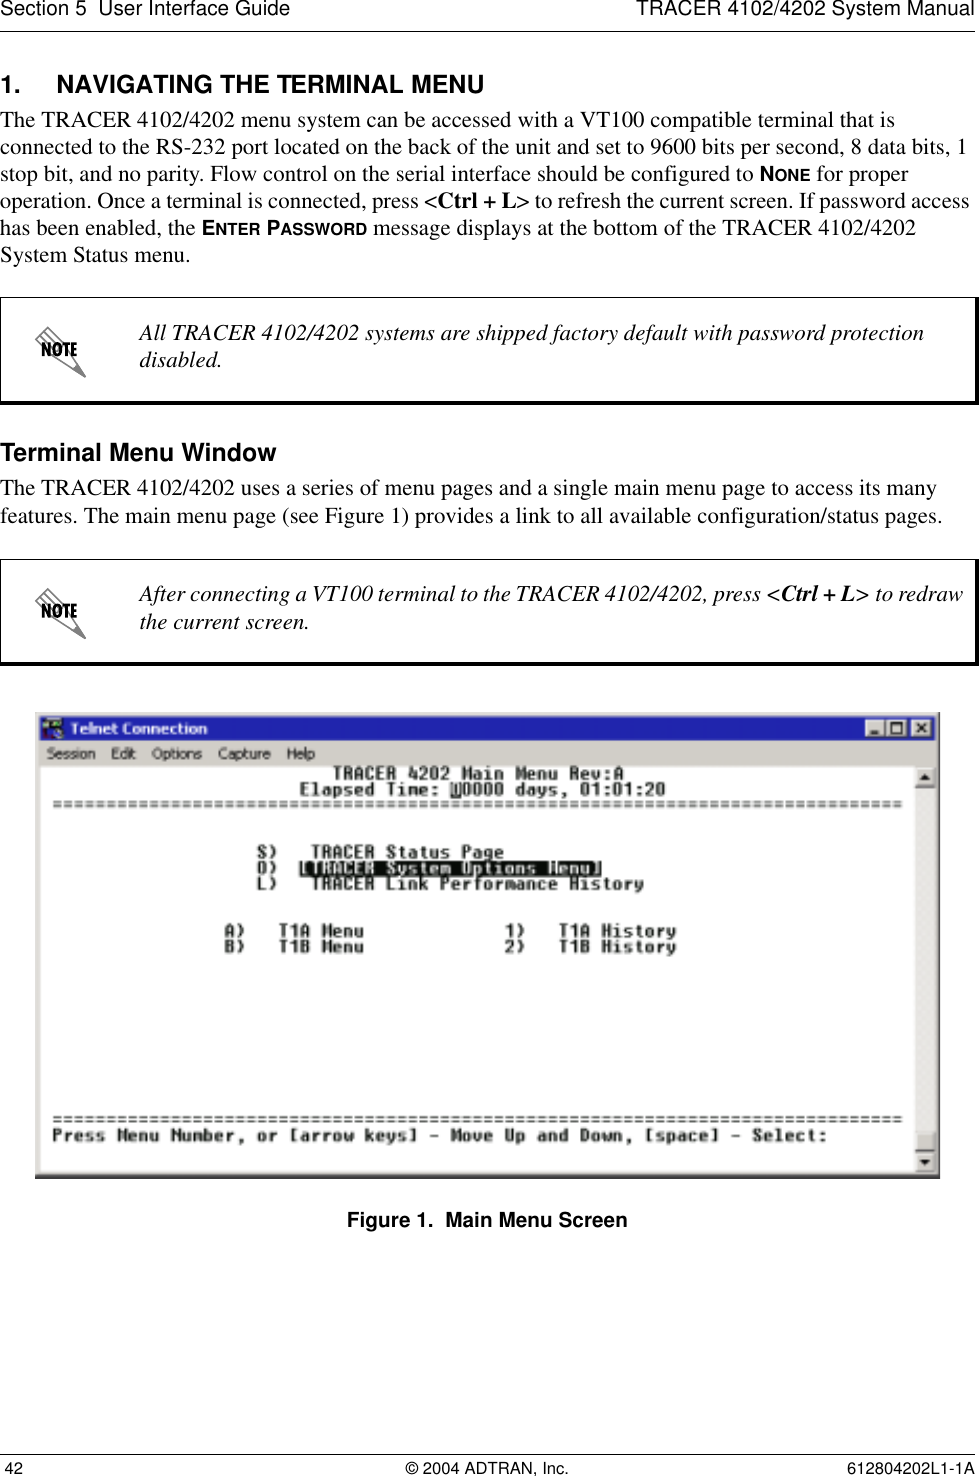 Section 5  User Interface Guide TRACER 4102/4202 System Manual 42 © 2004 ADTRAN, Inc. 612804202L1-1A1. NAVIGATING THE TERMINAL MENUThe TRACER 4102/4202 menu system can be accessed with a VT100 compatible terminal that is connected to the RS-232 port located on the back of the unit and set to 9600 bits per second, 8 data bits, 1 stop bit, and no parity. Flow control on the serial interface should be configured to NONE for proper operation. Once a terminal is connected, press &lt;Ctrl + L&gt; to refresh the current screen. If password access has been enabled, the ENTER PASSWORD message displays at the bottom of the TRACER 4102/4202 System Status menu. Terminal Menu WindowThe TRACER 4102/4202 uses a series of menu pages and a single main menu page to access its many features. The main menu page (see Figure 1) provides a link to all available configuration/status pages.Figure 1.  Main Menu ScreenAll TRACER 4102/4202 systems are shipped factory default with password protection disabled.After connecting a VT100 terminal to the TRACER 4102/4202, press &lt;Ctrl + L&gt; to redraw the current screen.